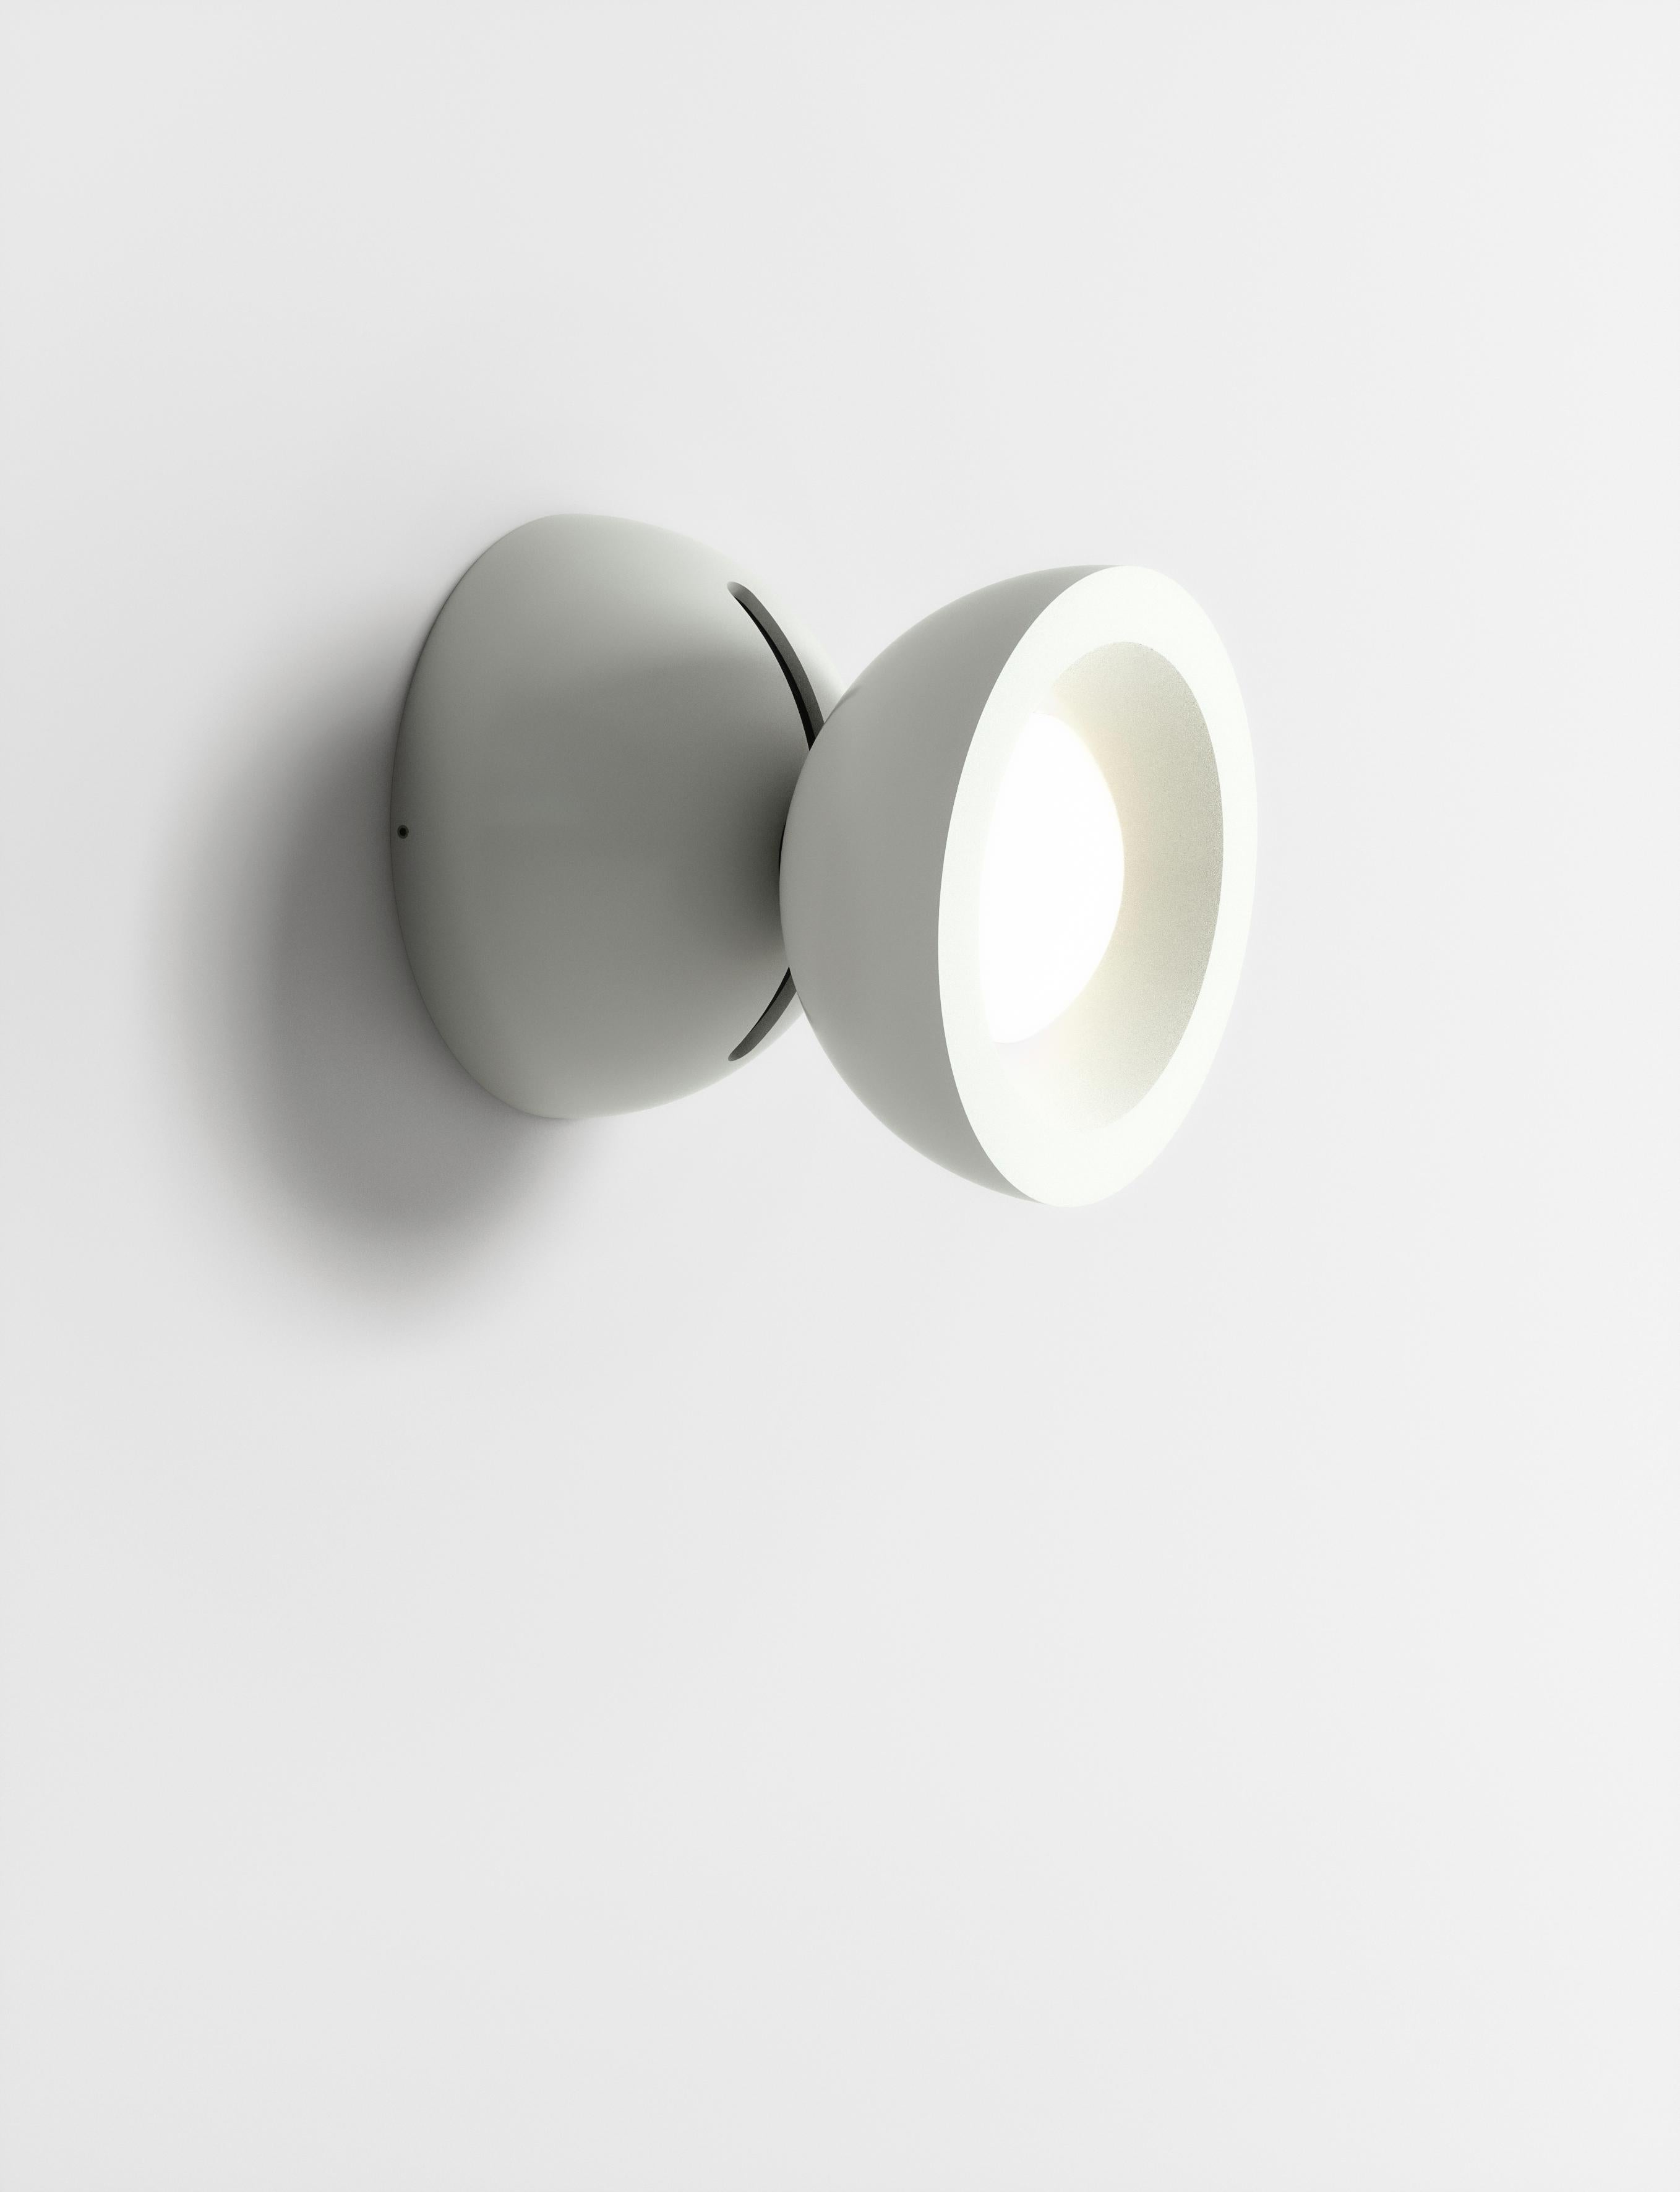 Axolight DoDot Wall/ Ceiling Light in White Aluminum by Simone Micheli

DoDot, the latest creation of architect and designer Simone Micheli is the new adjustable lamp by Axolight, suitable for ceiling and wall

Compact and performing, DoDot is made